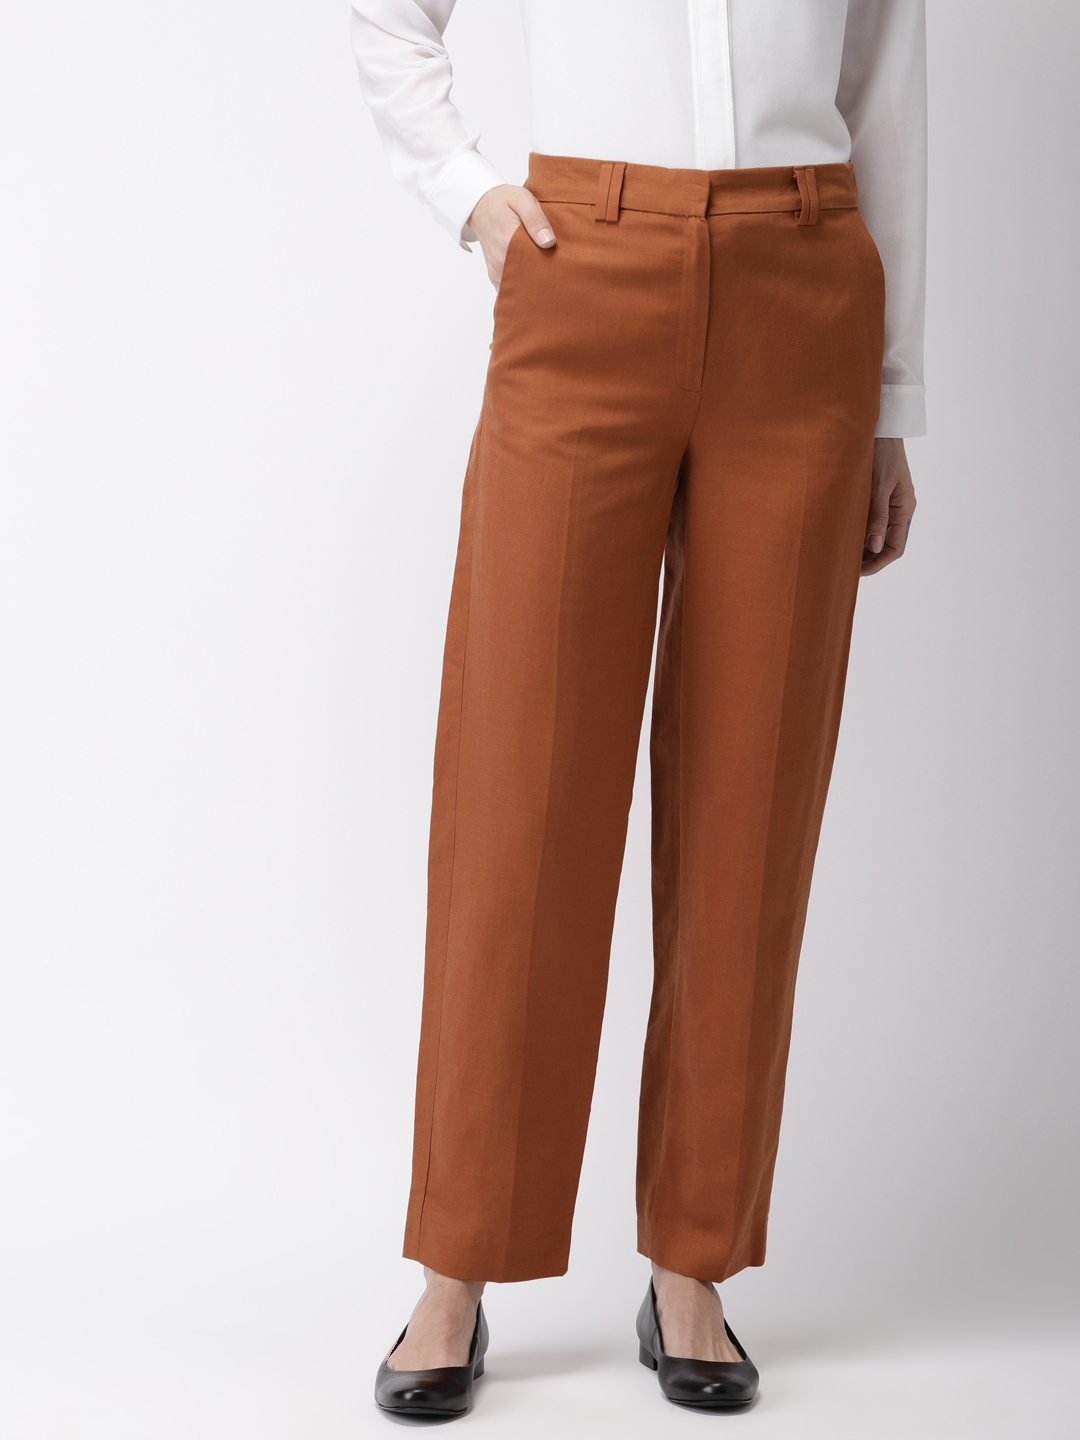 Corduroy Colored Pants for Fall Styled Multiple Ways  Straight A Style